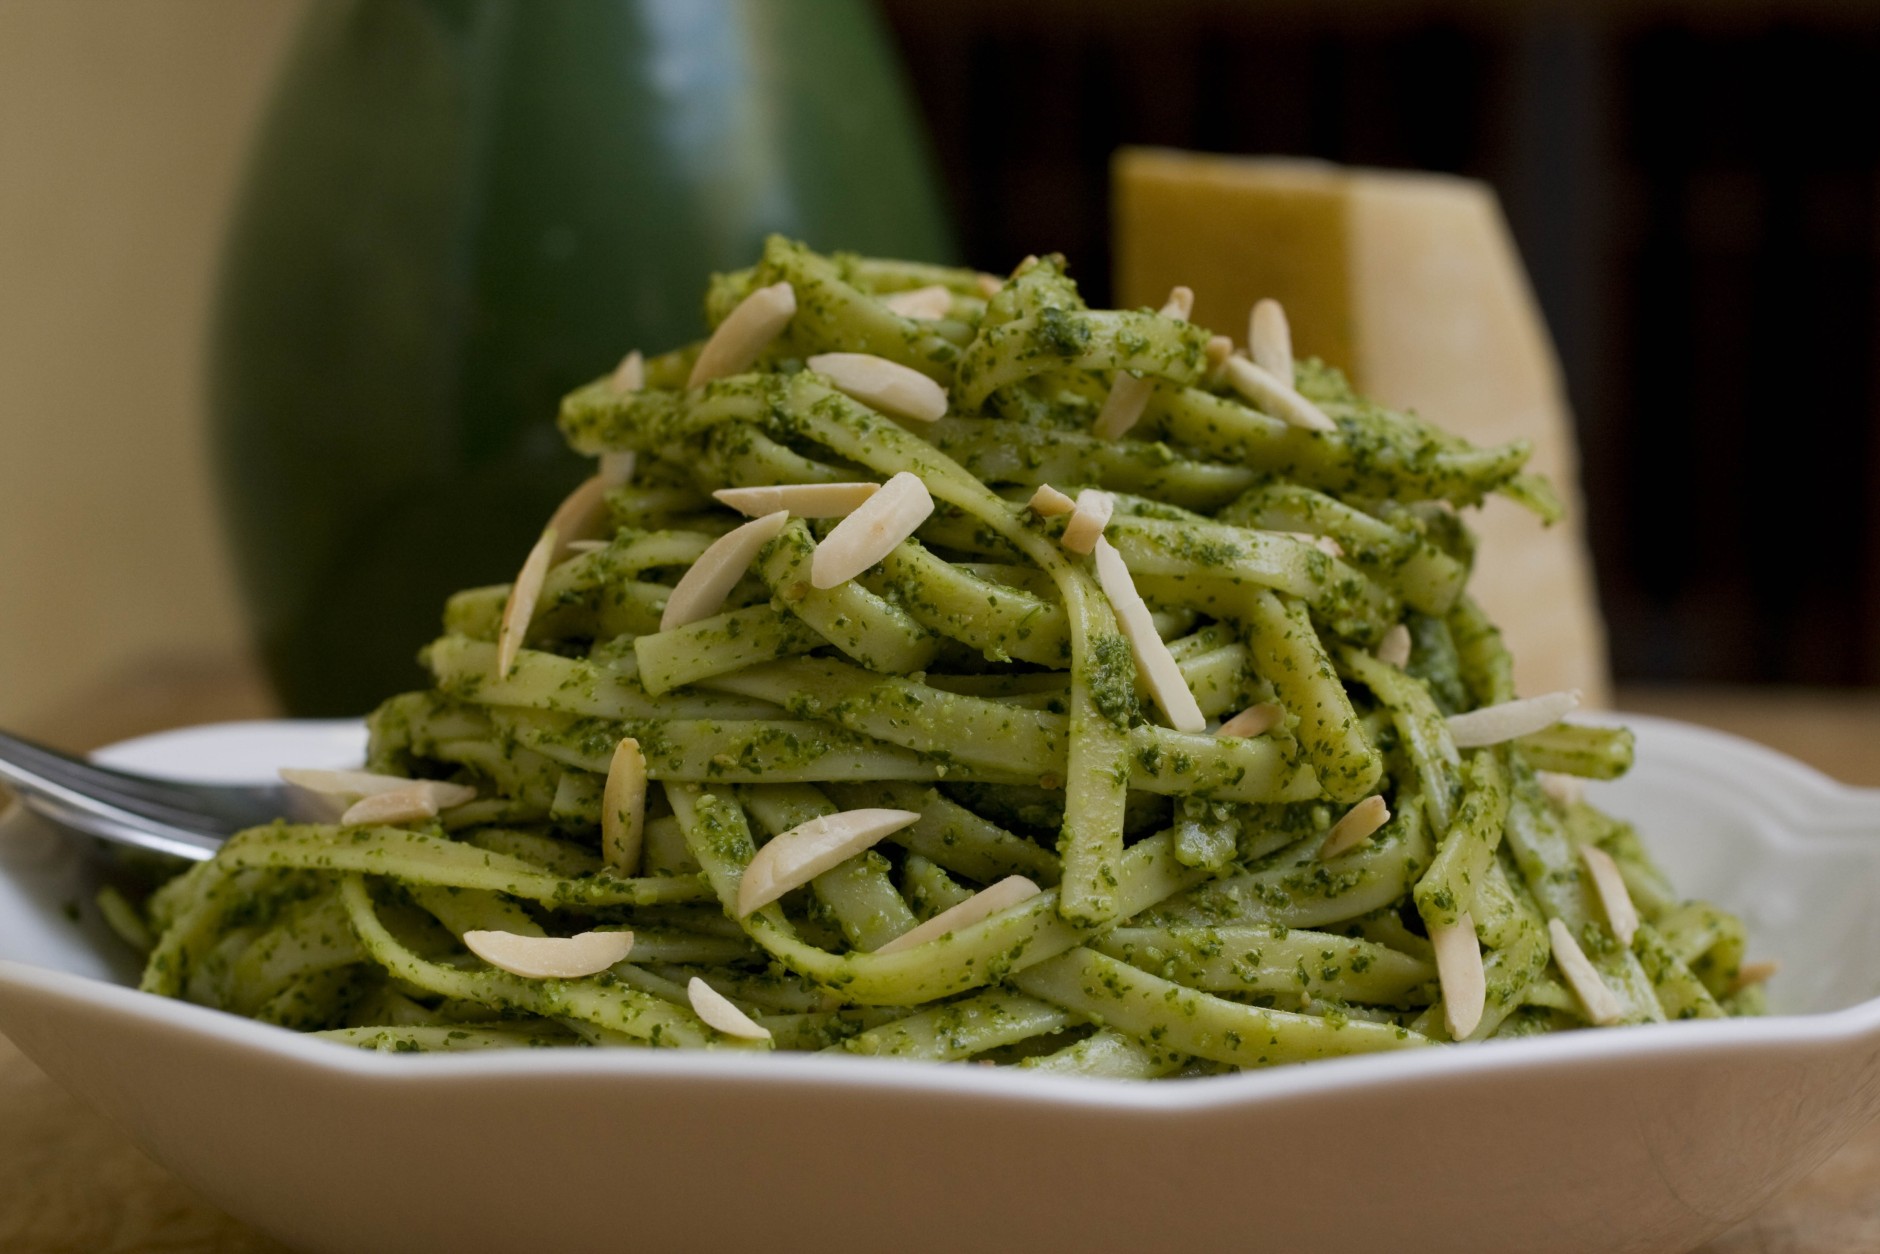 **FOR USE WITH AP LIFESTYLES**  Cilantro and Toasted Almond Pesto is shown in this Monday April 6, 2009 photo. Cilantro provides the flavor punch in this Cilantro and Toasted Almond Pesto, shown served on linguini. (AP Photo/Larry Crowe)